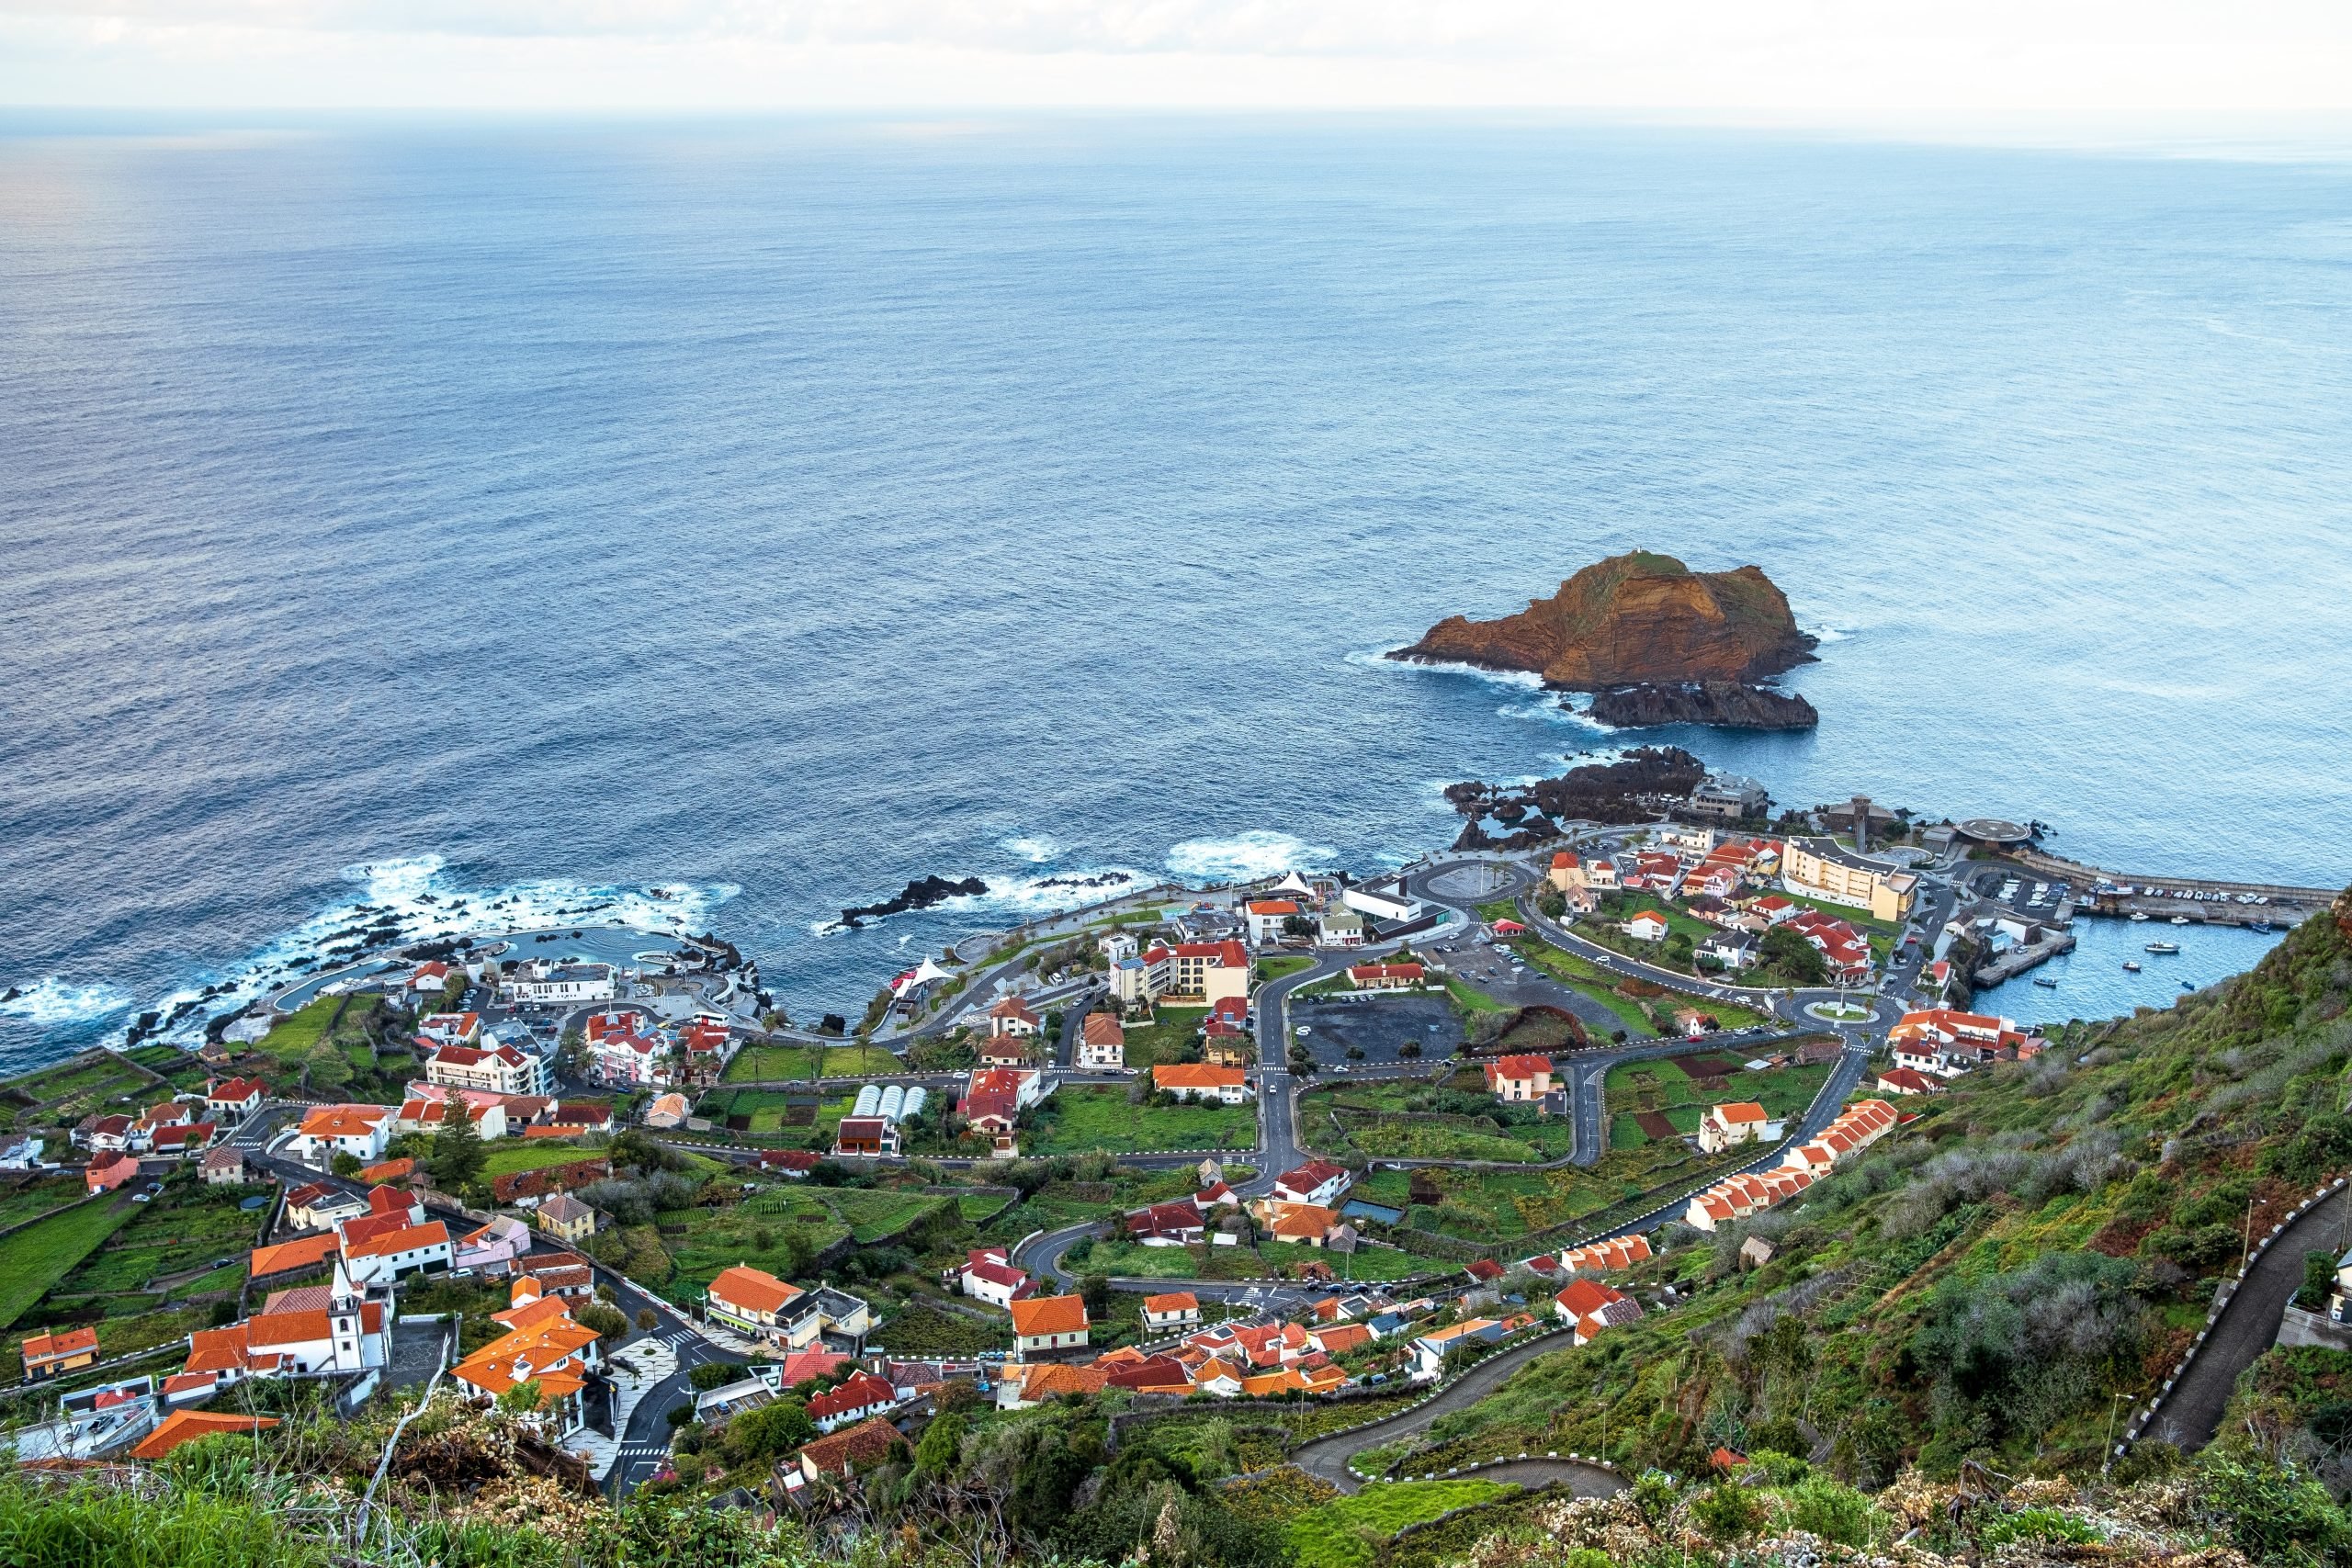 travel from portugal to madeira